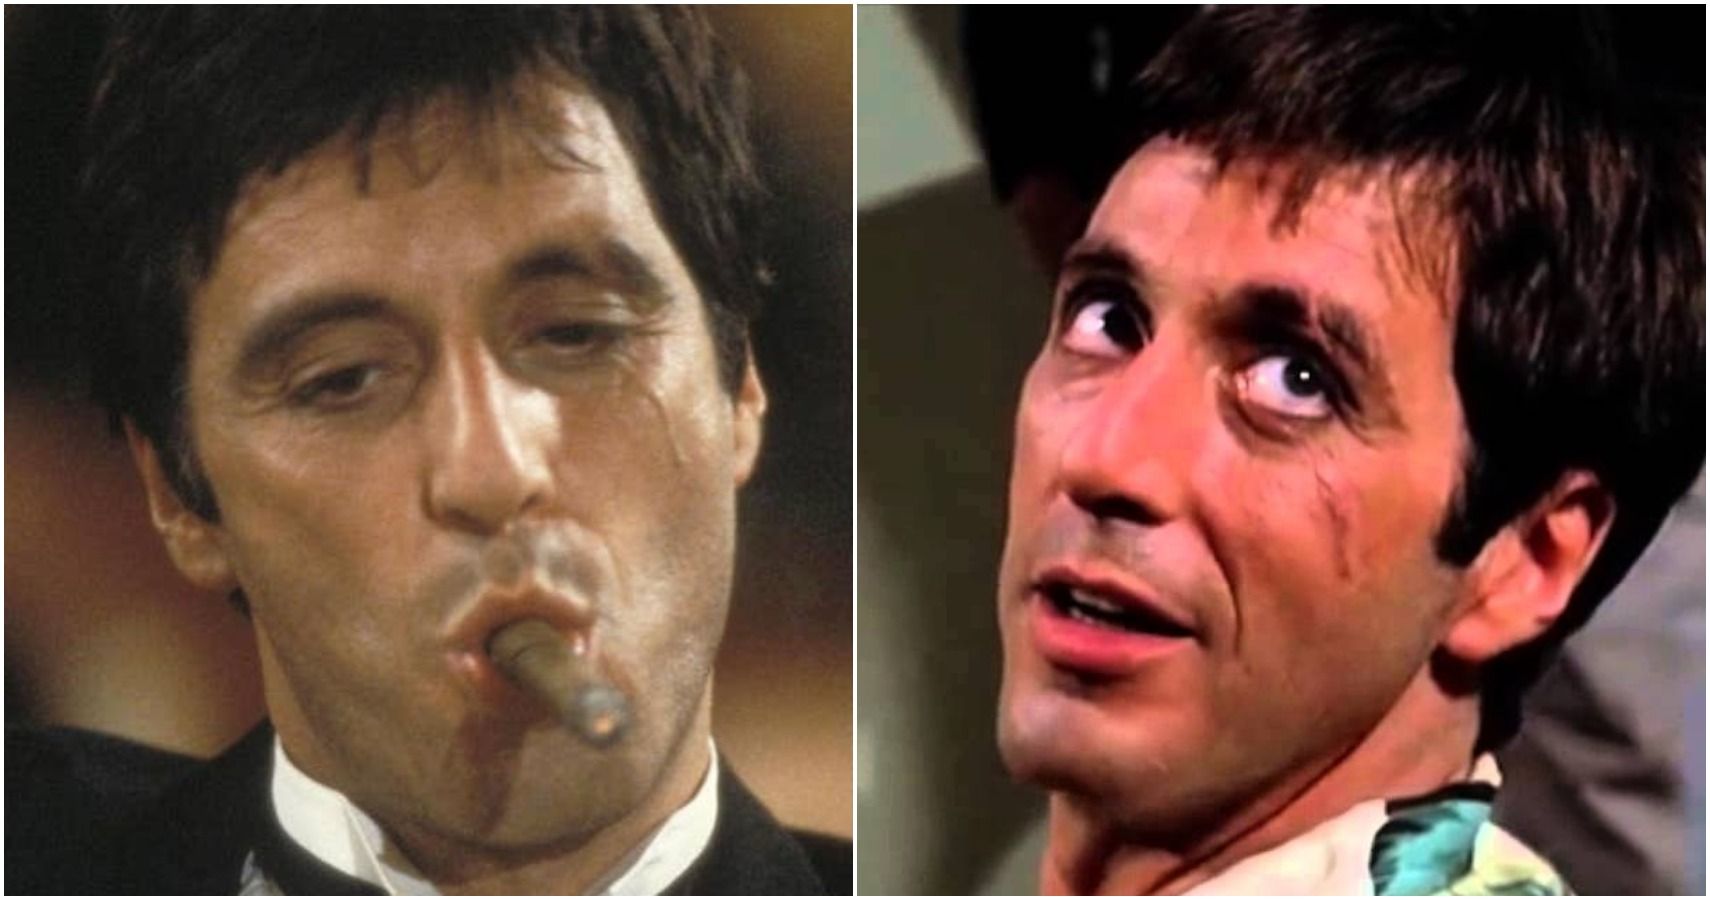 10 Funniest Scenes From Scarface | ScreenRant